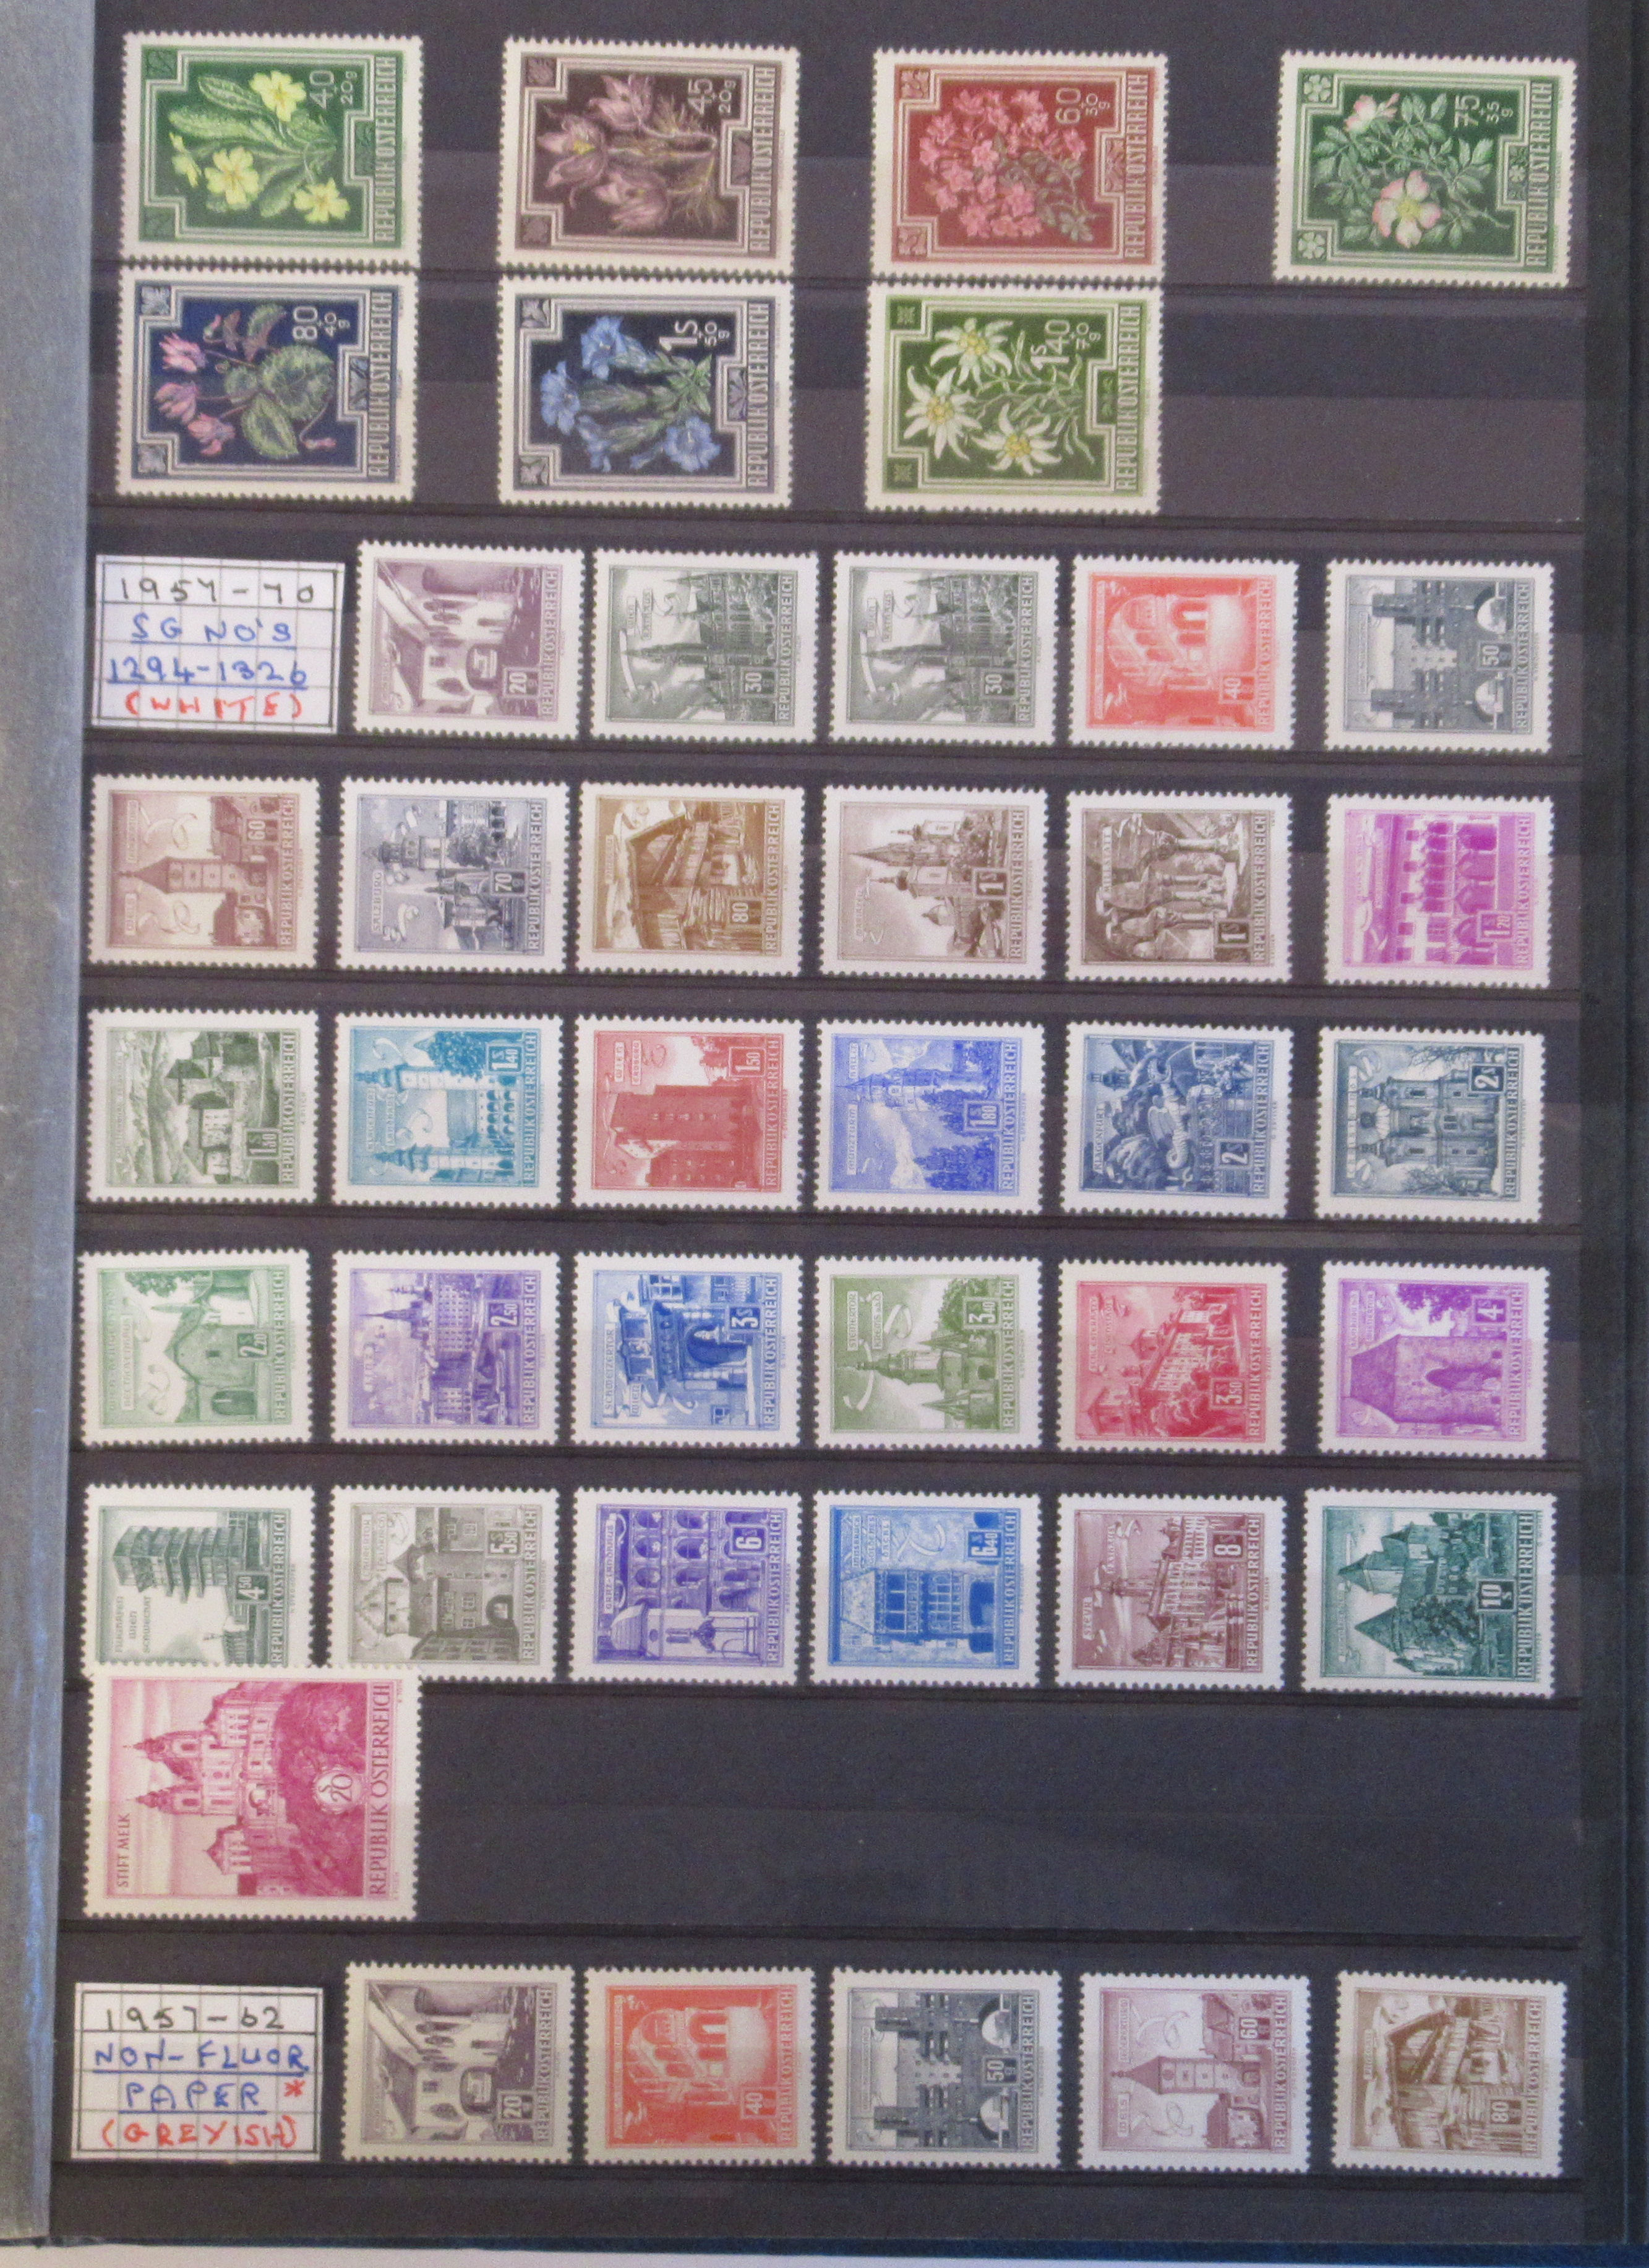 Postage stamps, Austria: 1908 to present day, - Image 3 of 6